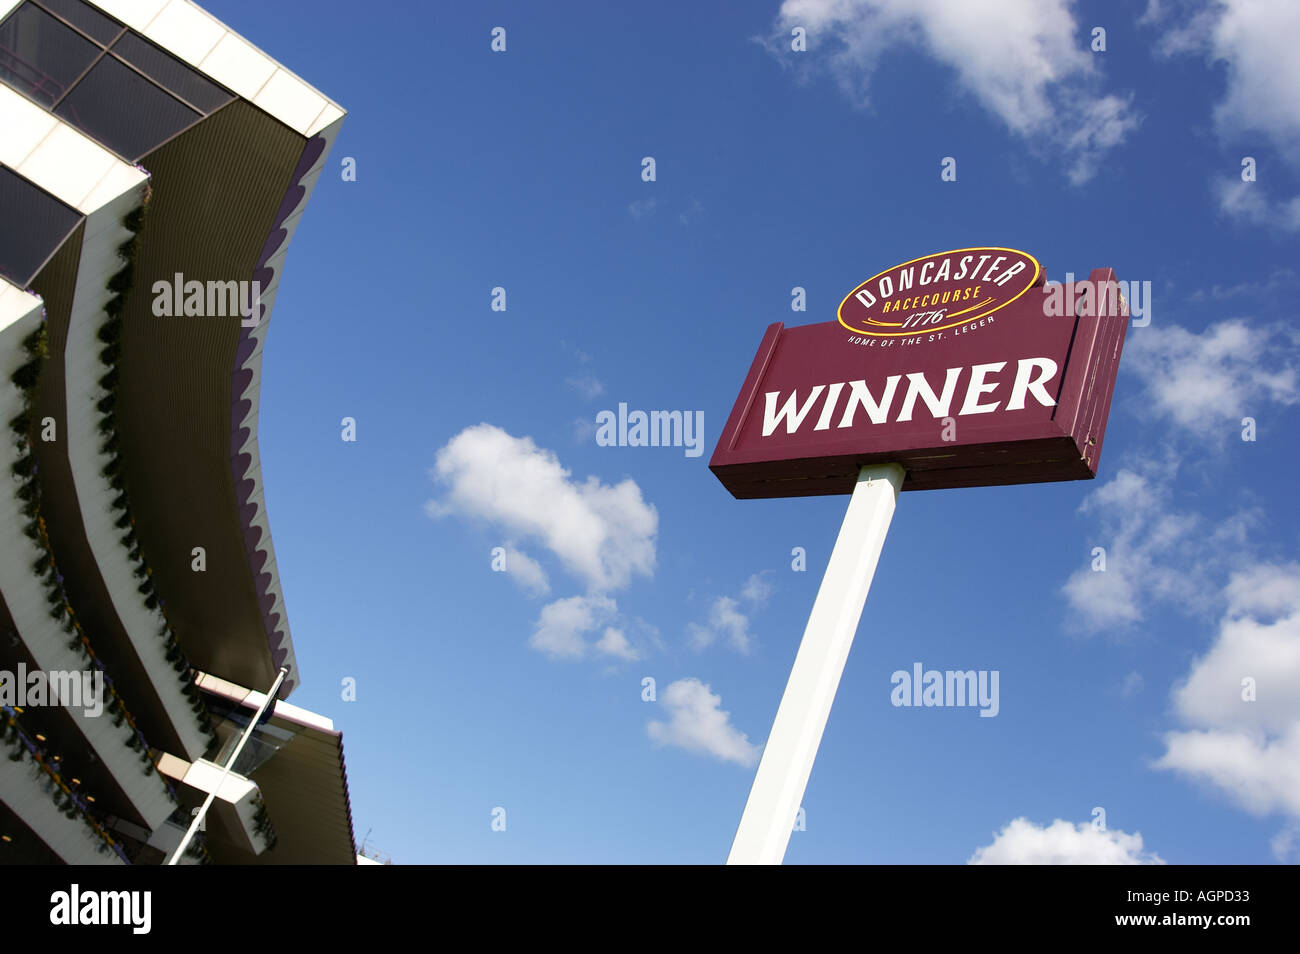 Winner signpost in the winners enclosure at Doncaster Racecourse Yorkshire England UK Stock Photo